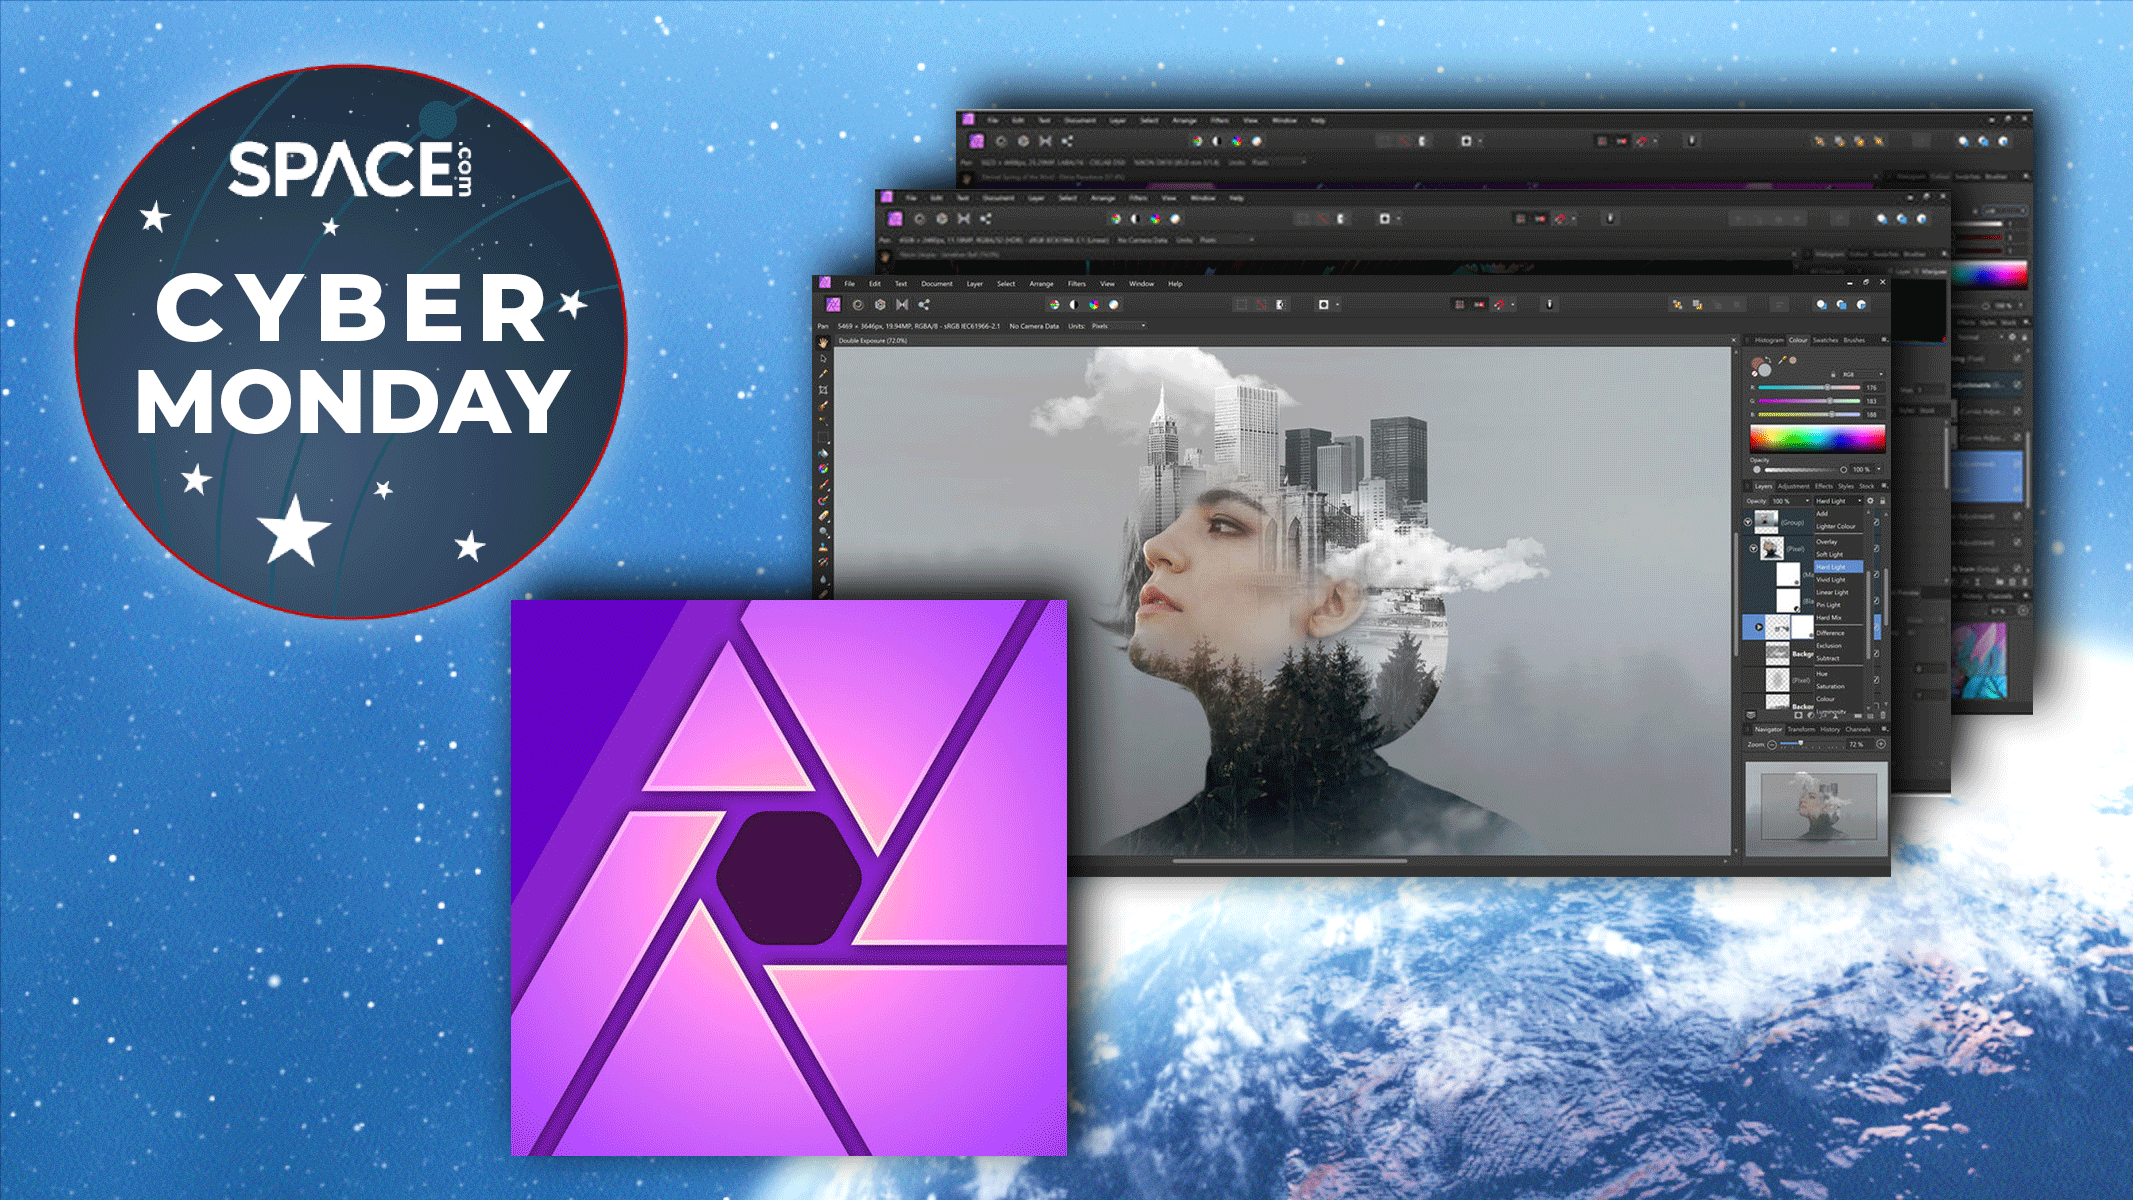 Affinity photo screenshots against an image of the earth with stars and a cyber monday badge